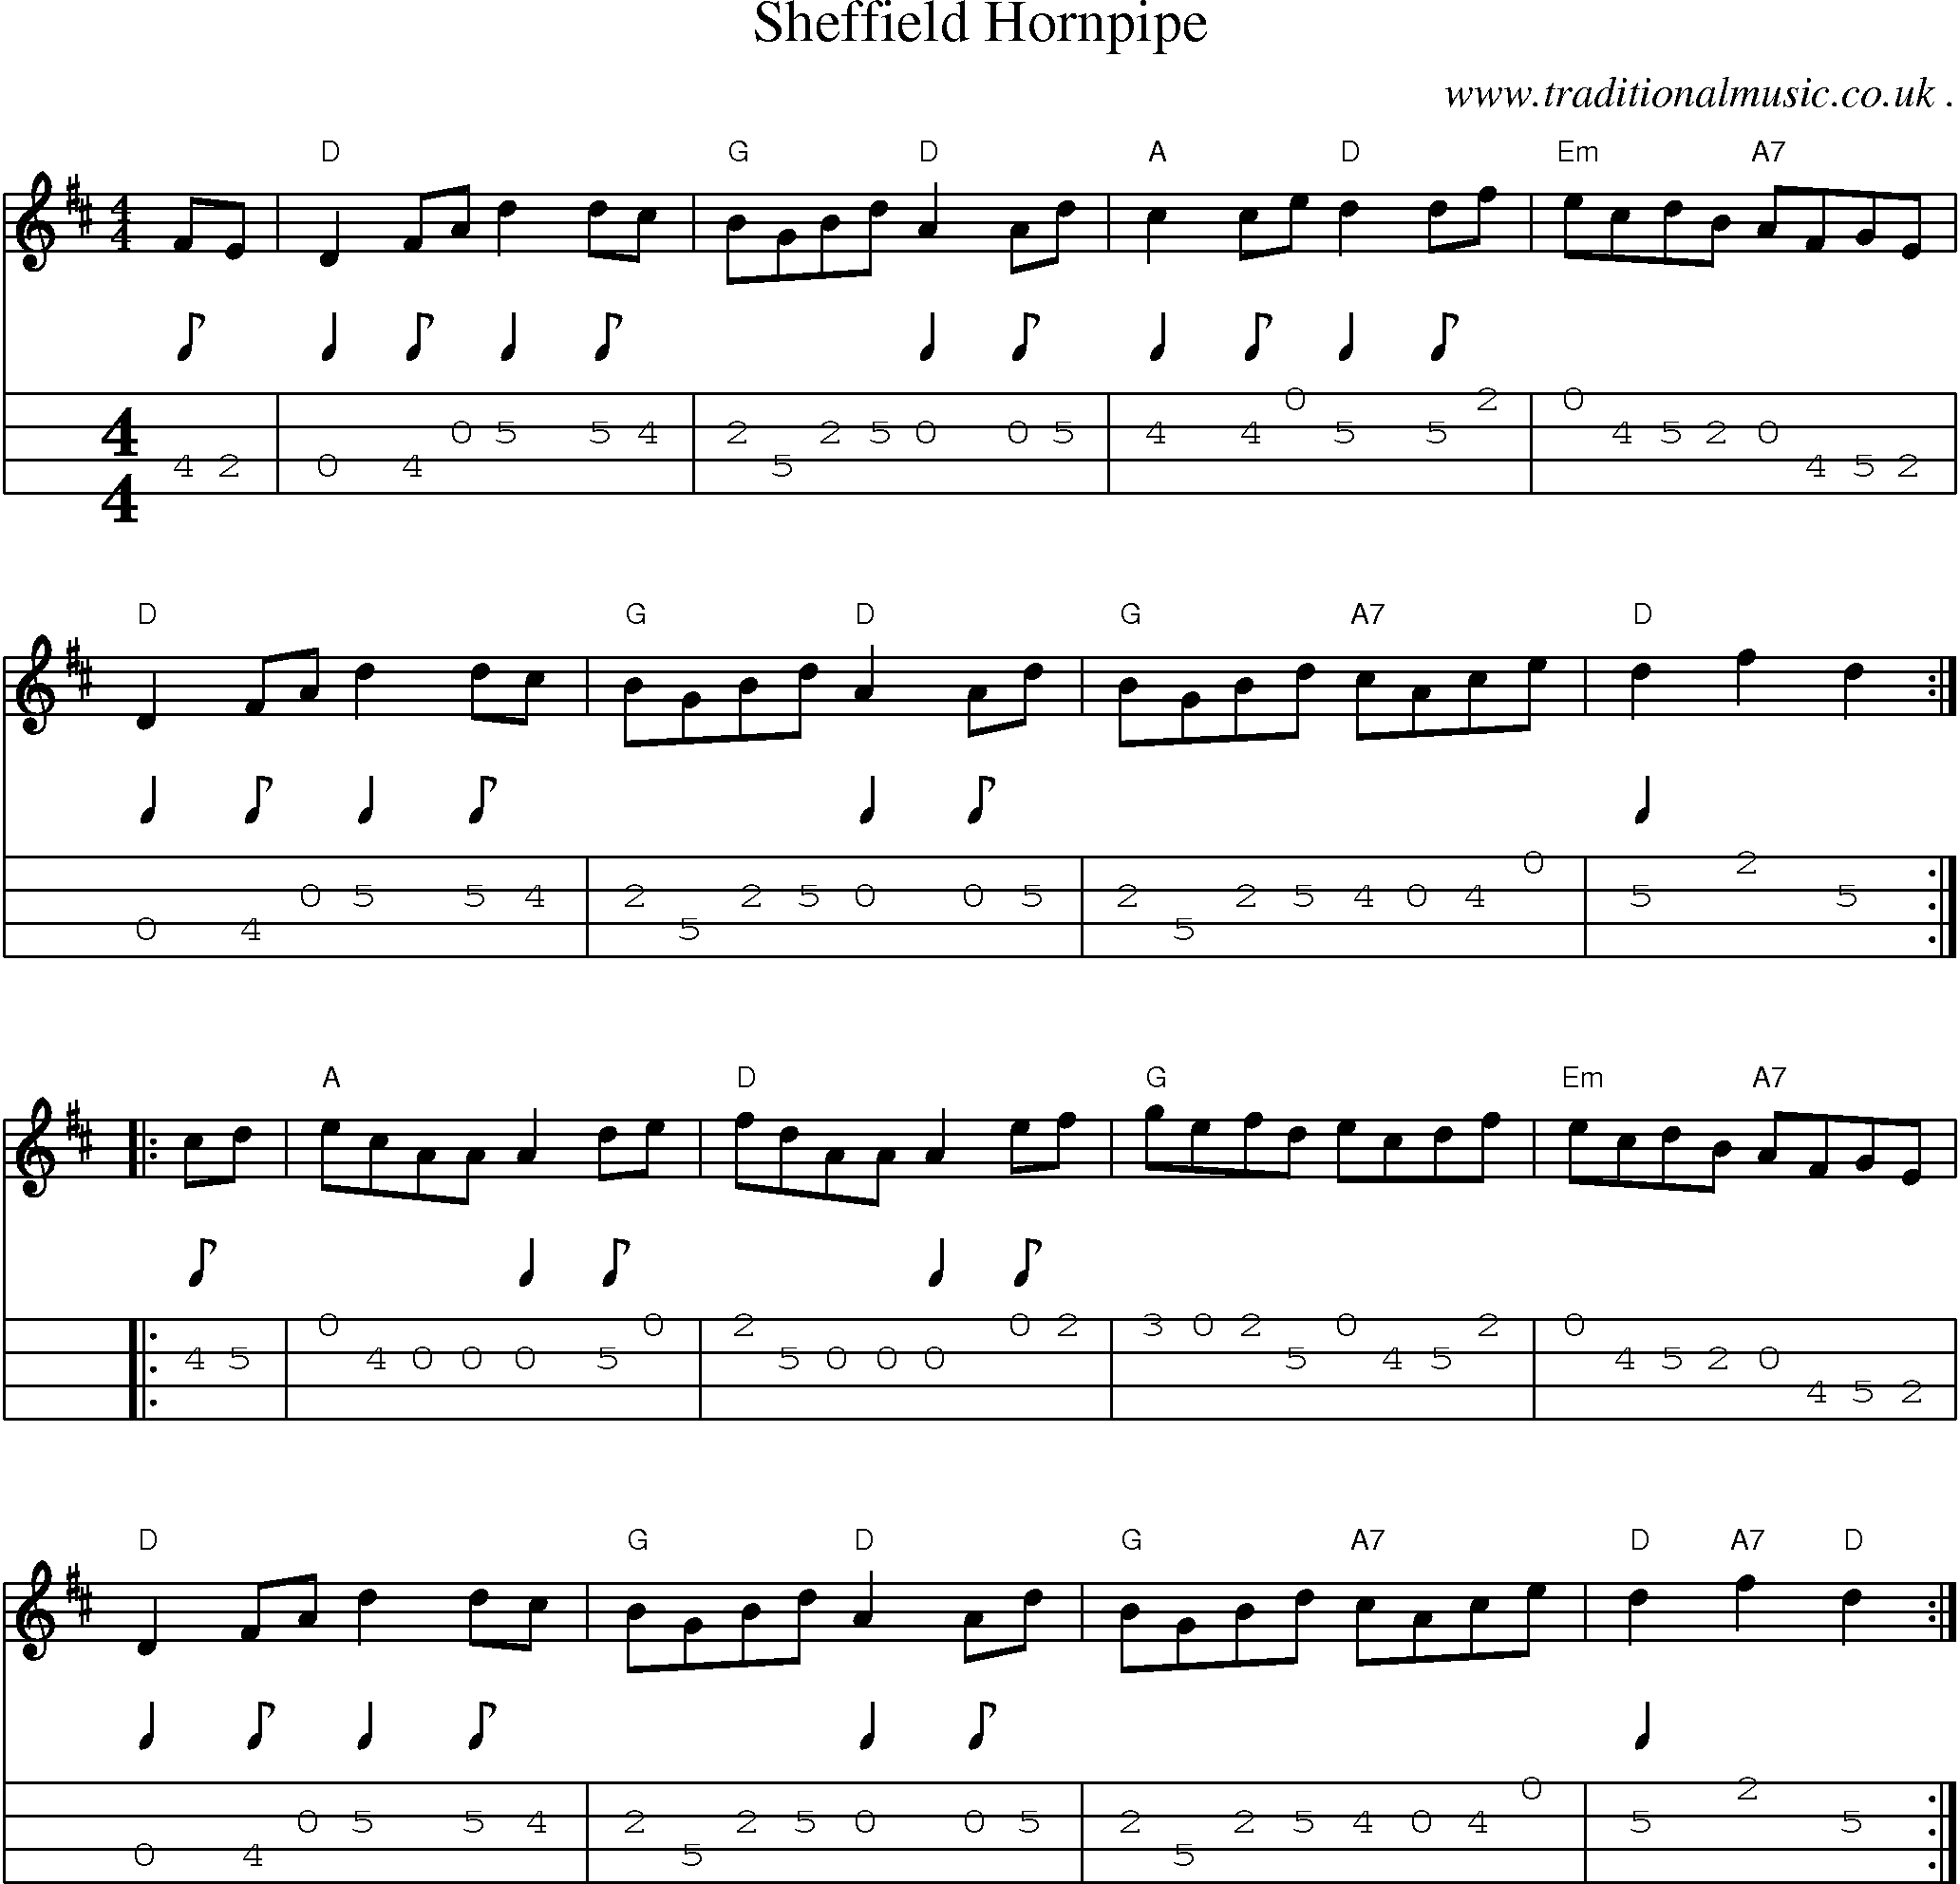 Music Score and Guitar Tabs for Sheffield Hornpipe